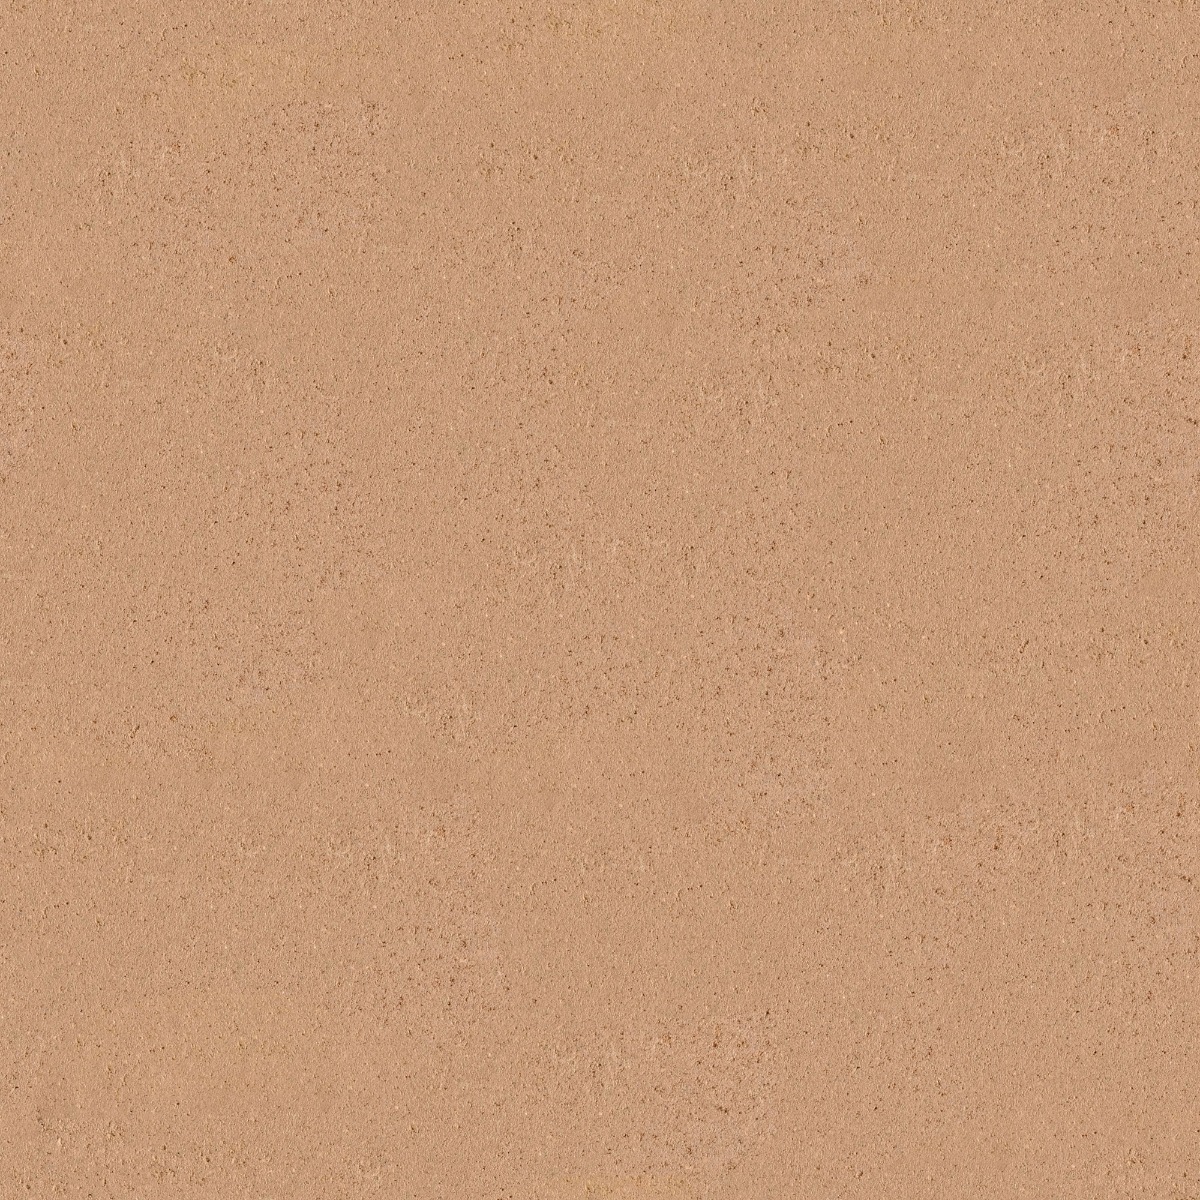 A seamless wall finishes texture with demi rustic finish in ter-08 units arranged in a None pattern